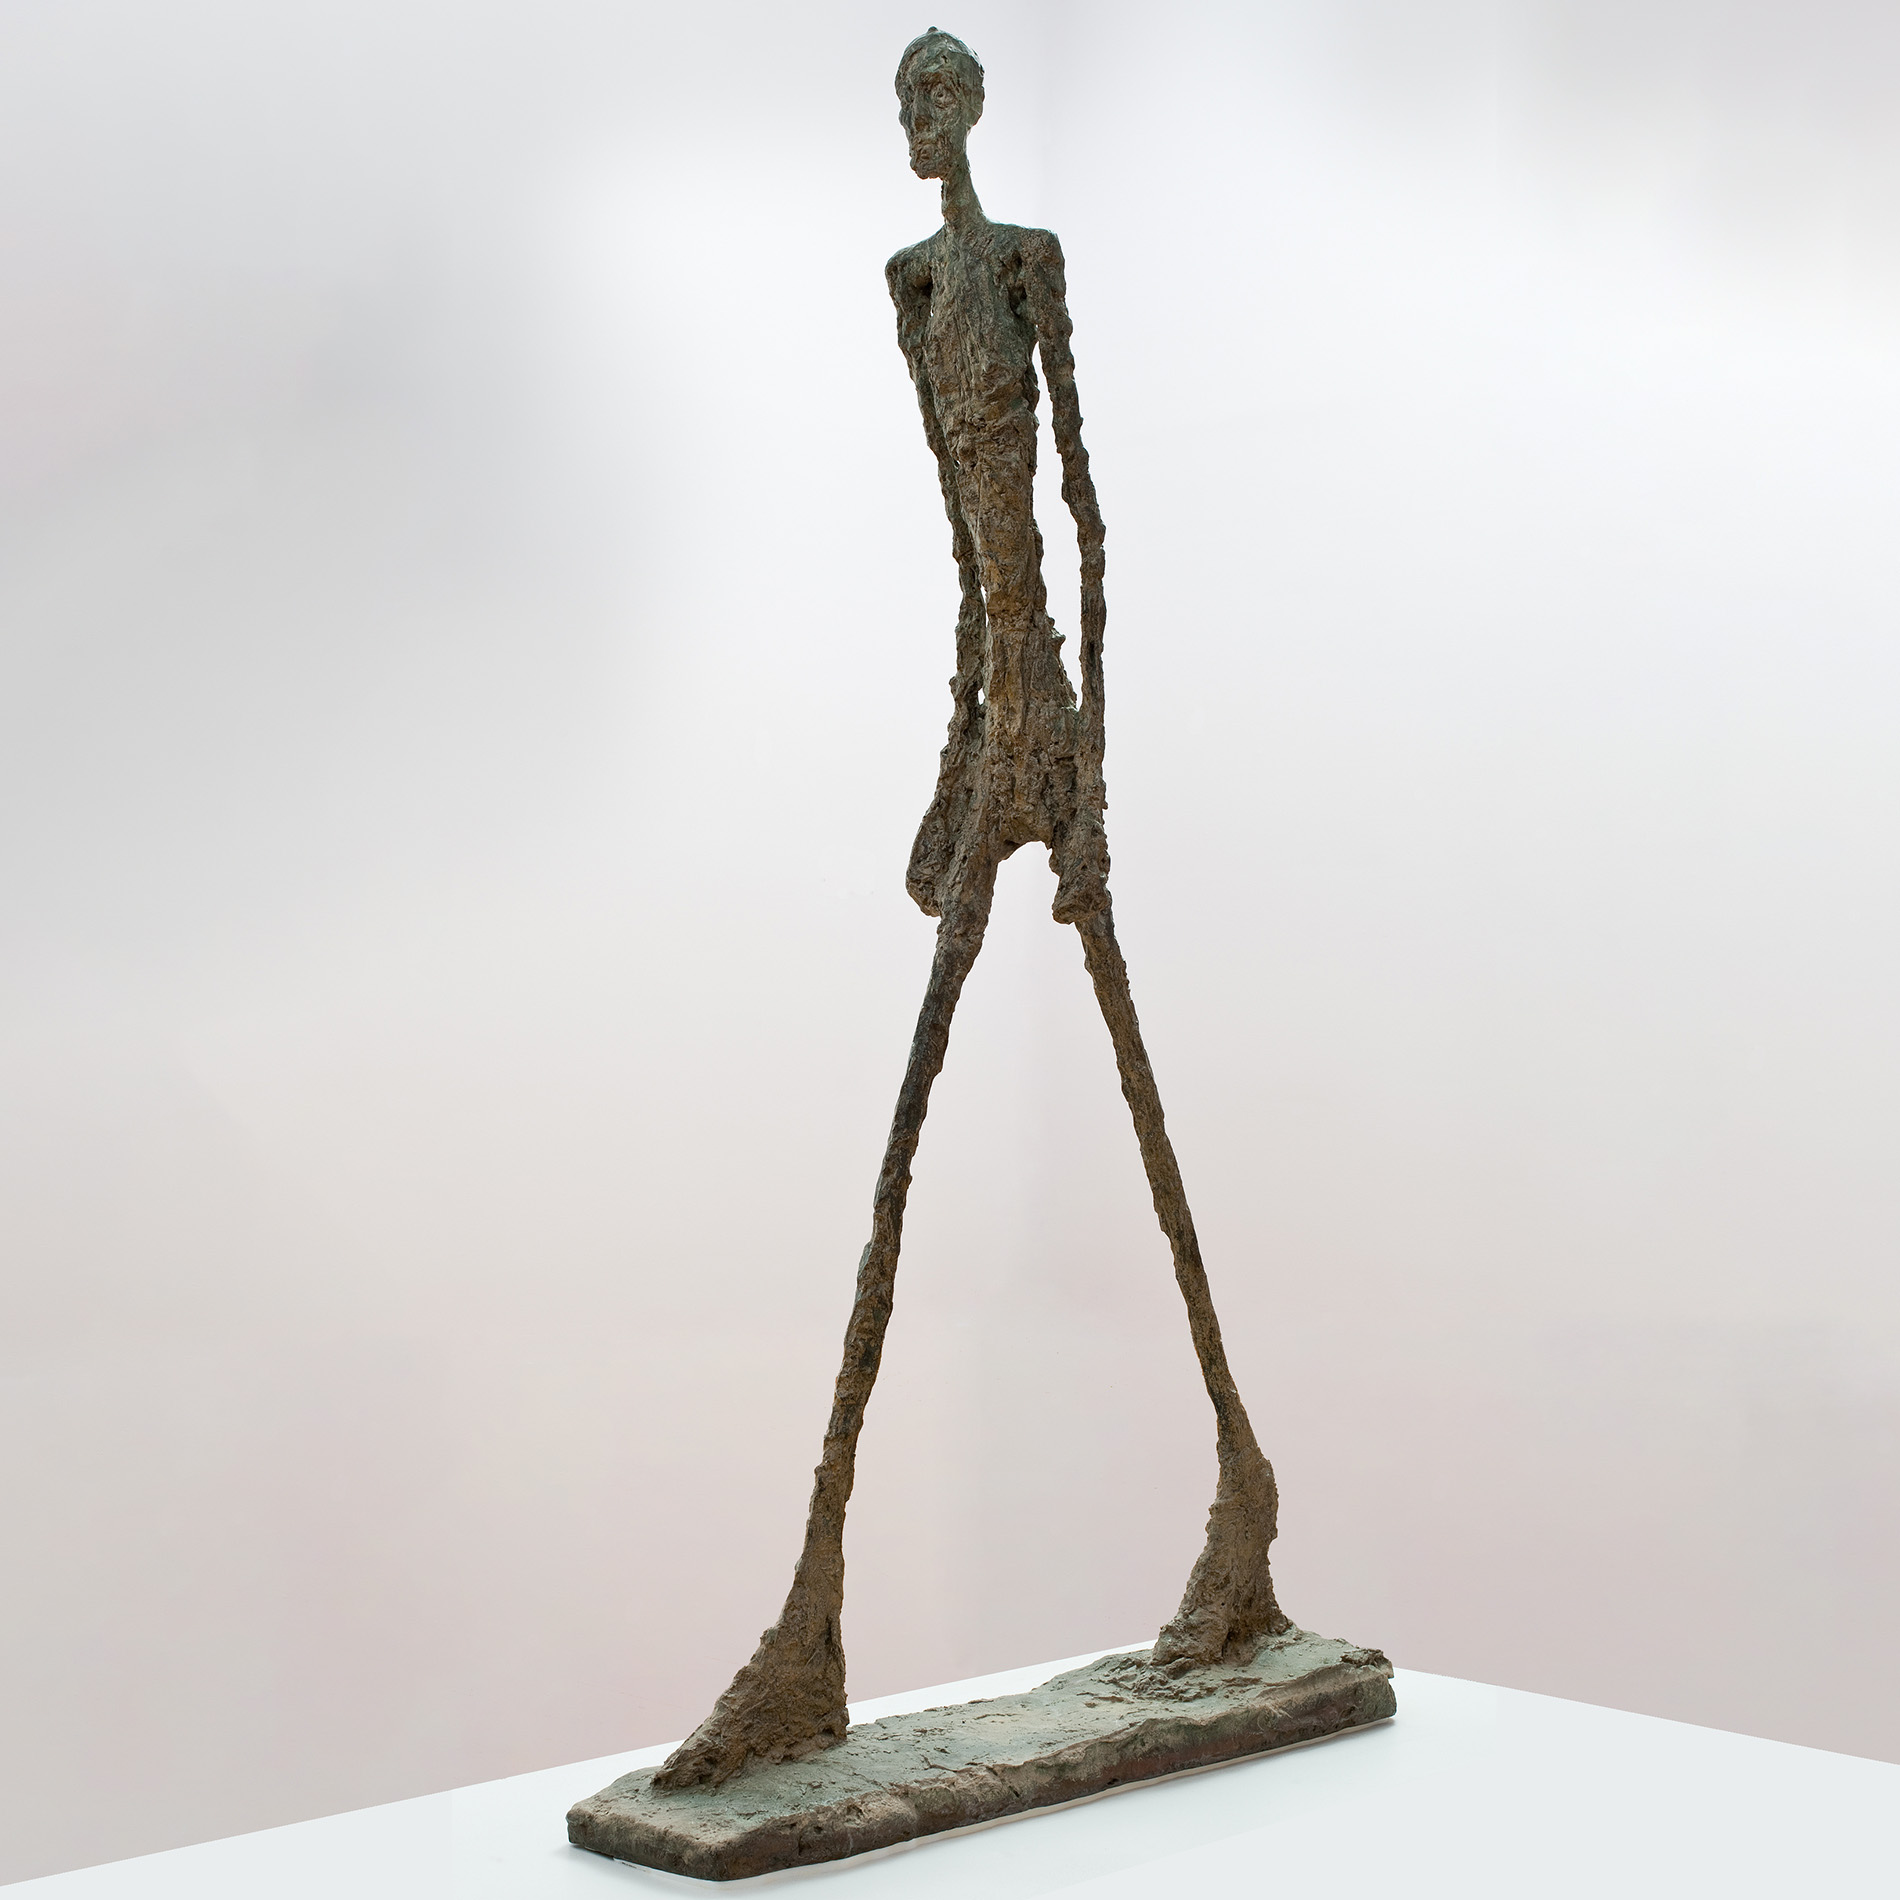 A figural sculpture with long arms and legs appears to stride forward